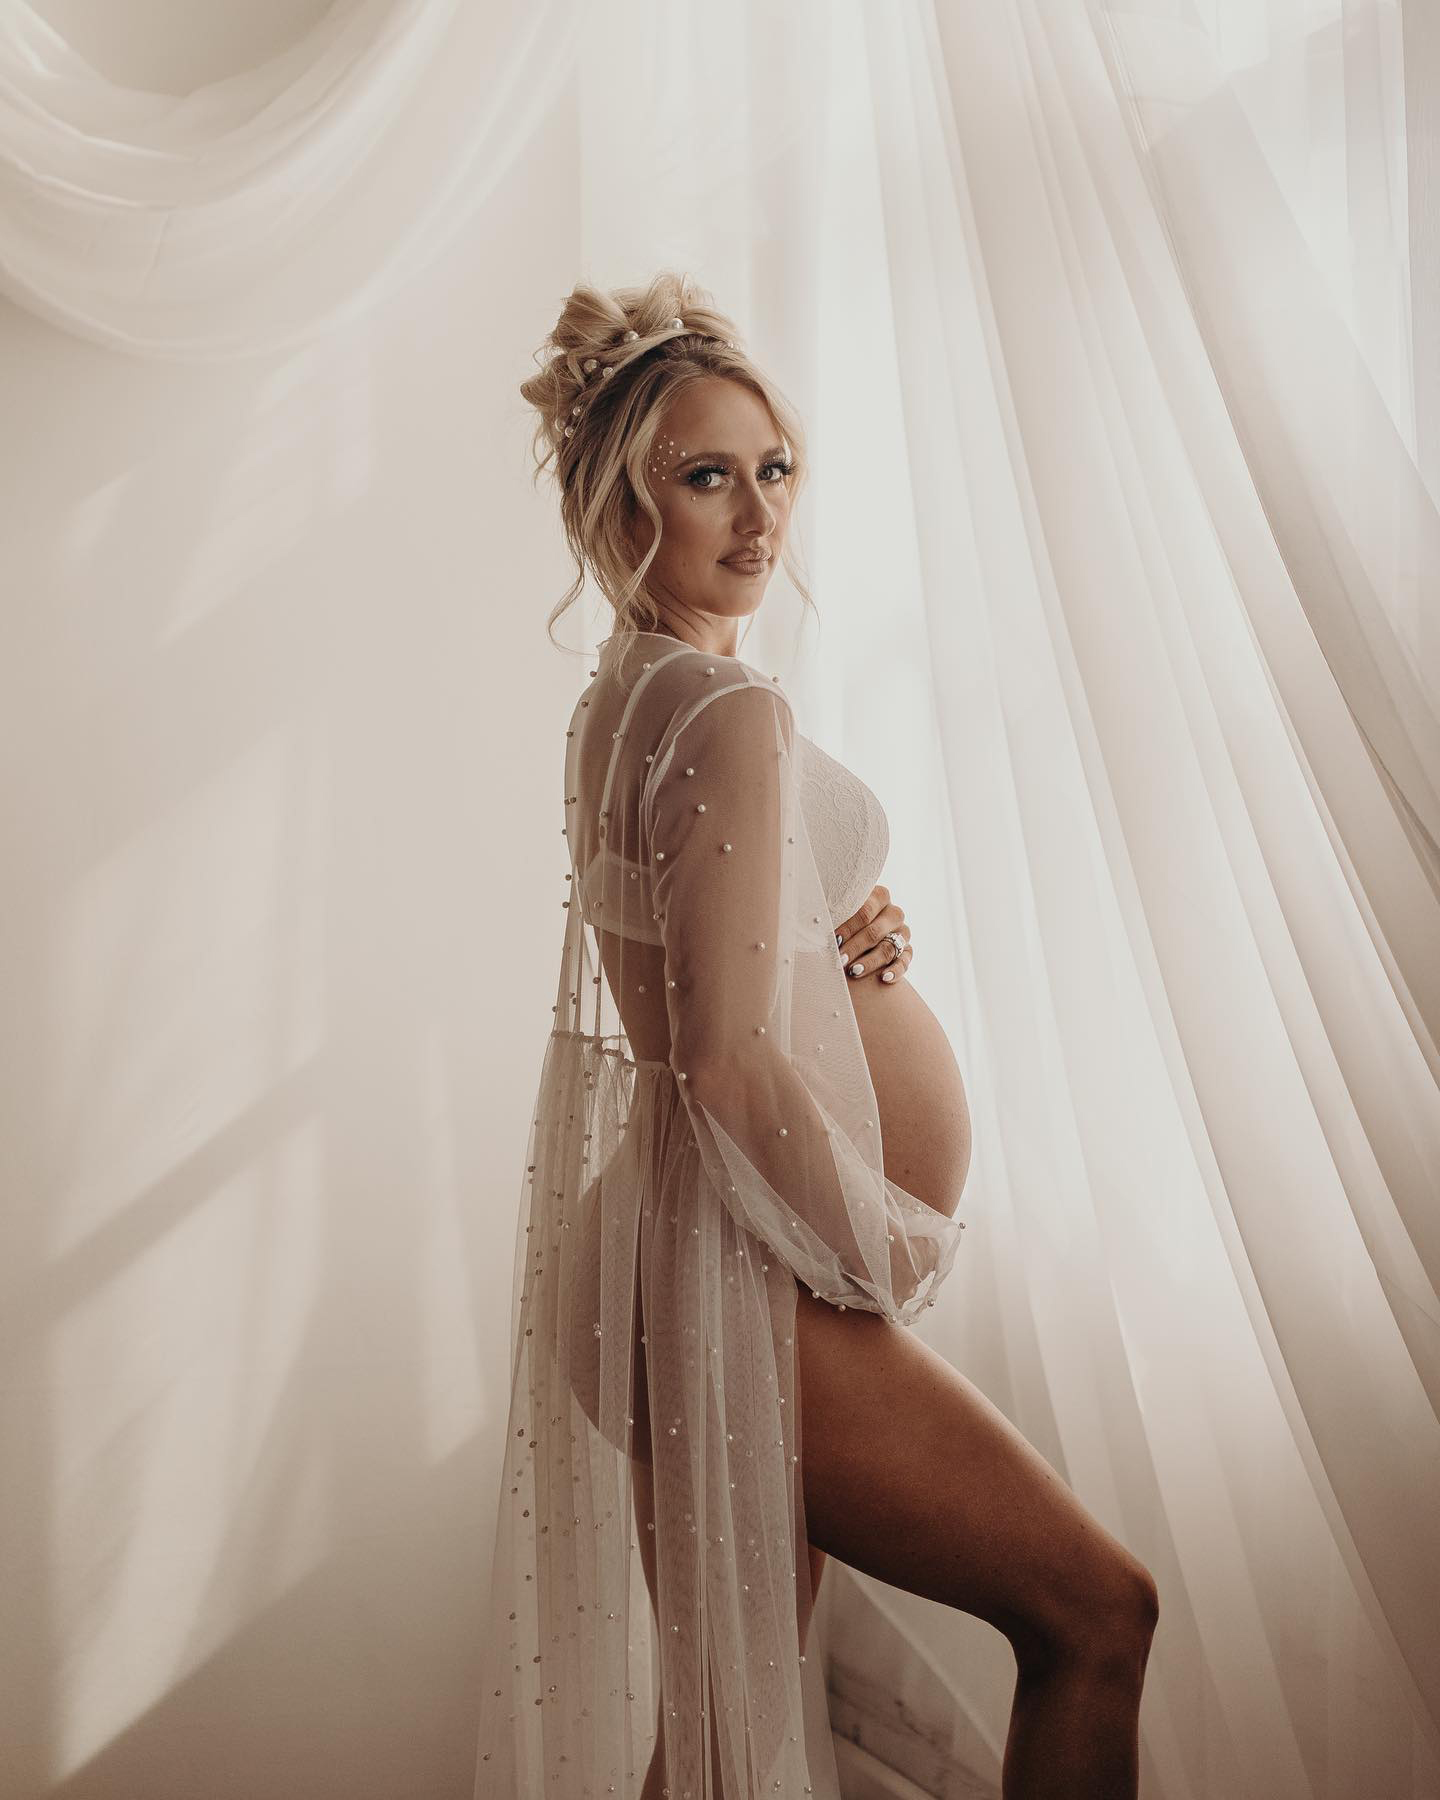 Brittany Matthews Embraced Body More This Pregnancy Pics image